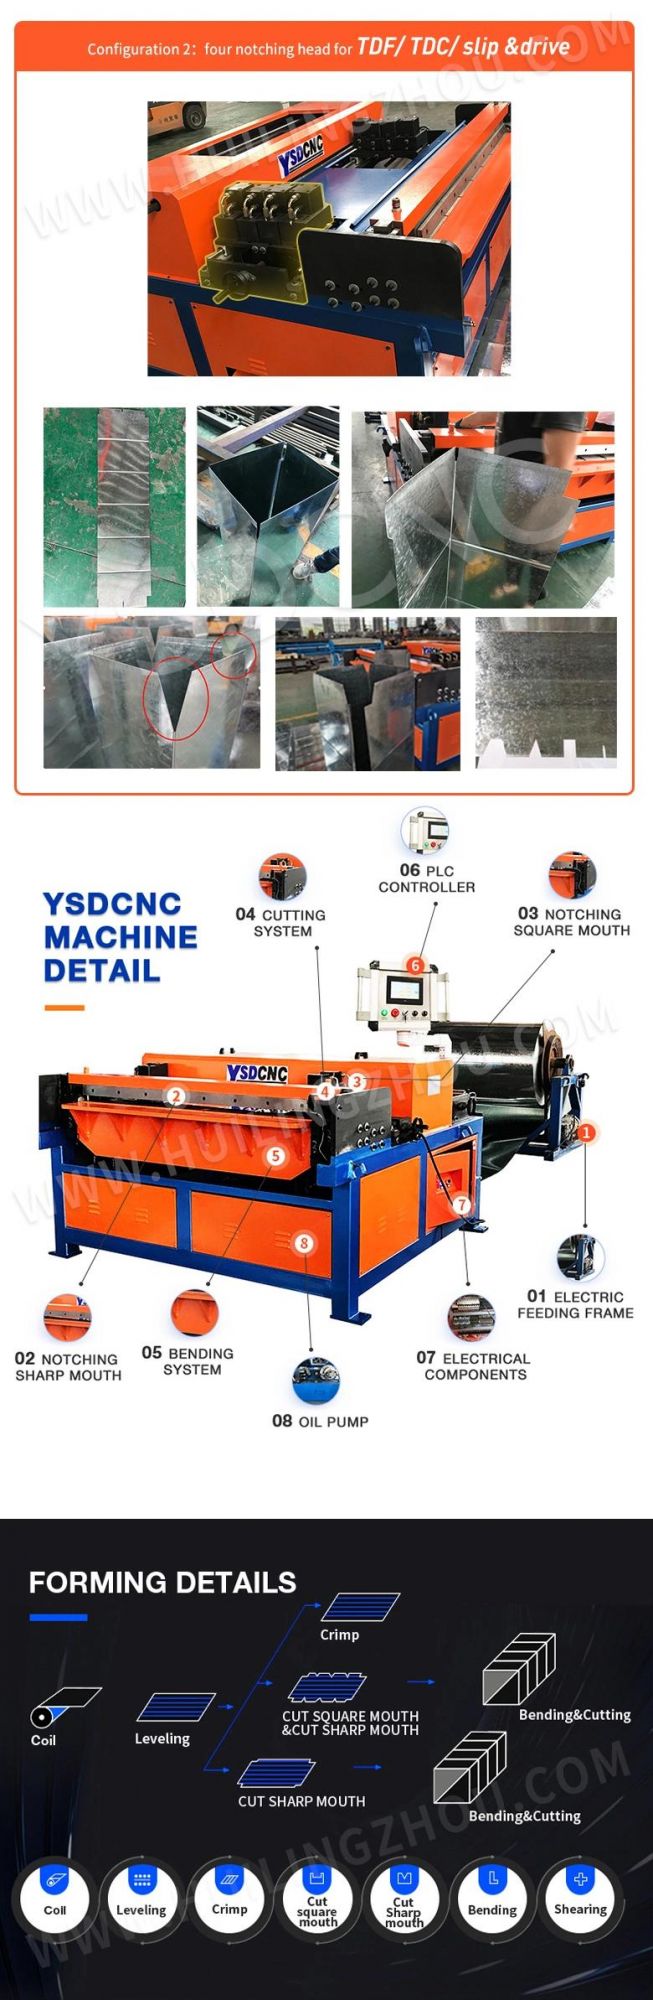 China Factory Sales HVAC Duct Making Machine Manufacture Auto Line 3, Air Square Tube Duct Production Line 2, 3, 4, 5